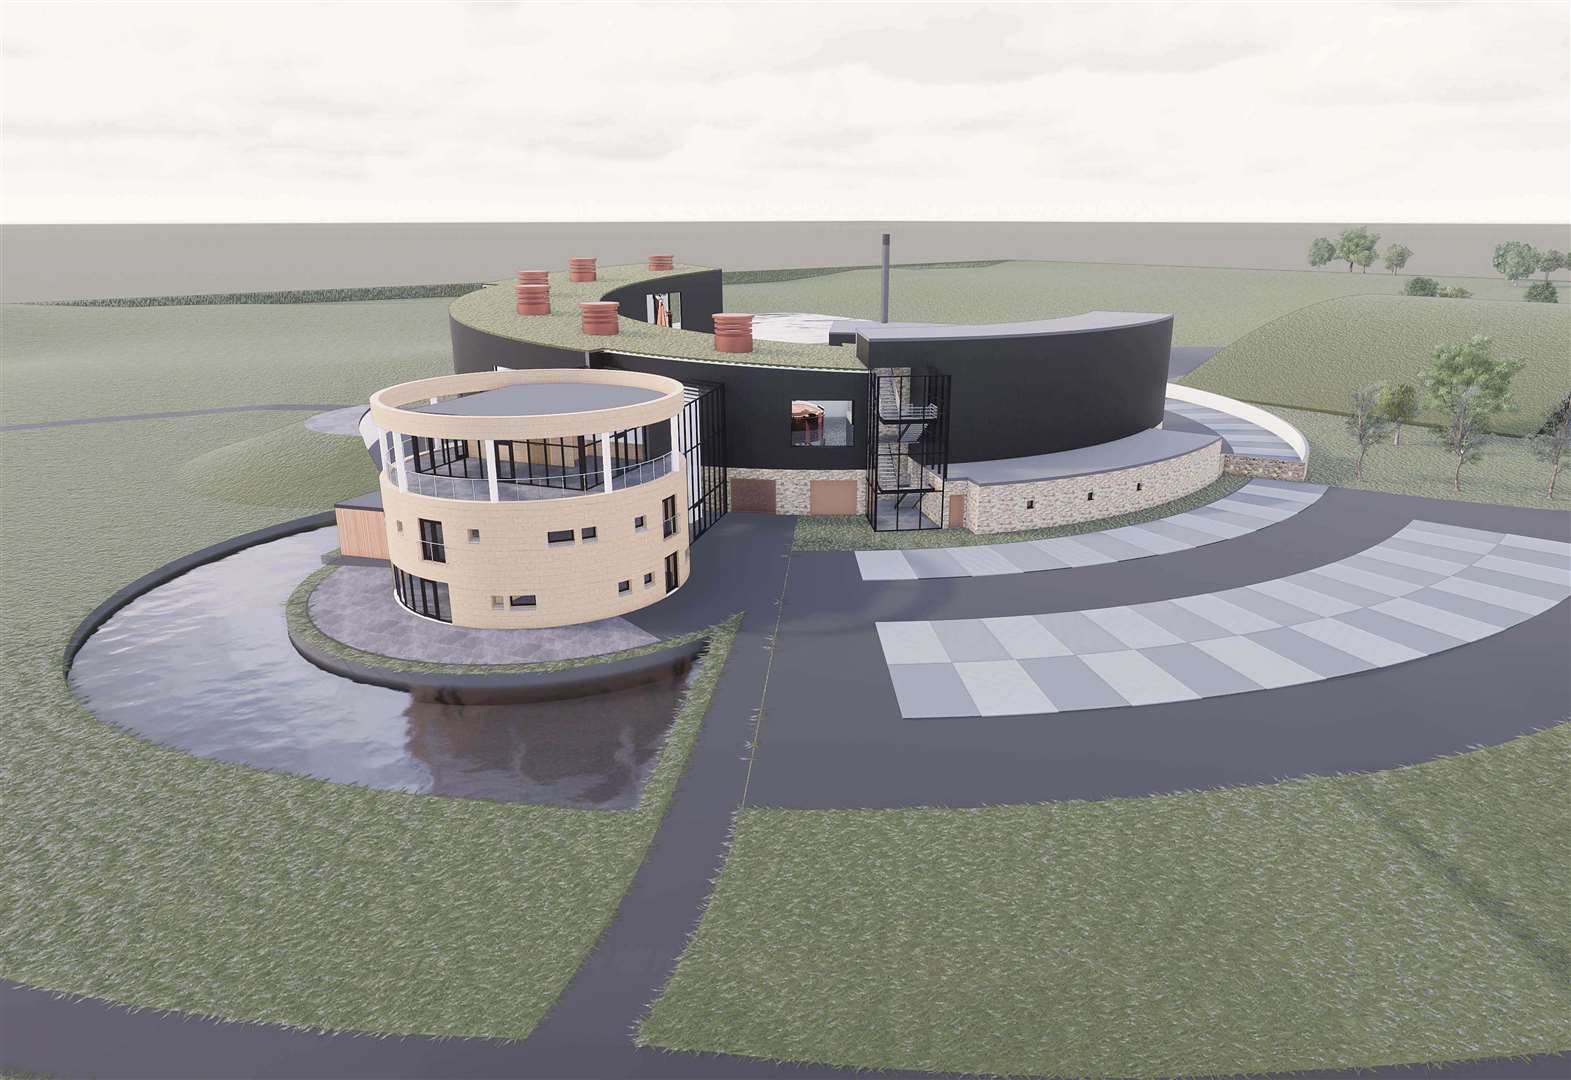 An artist's impression of what the new distillery will look like.